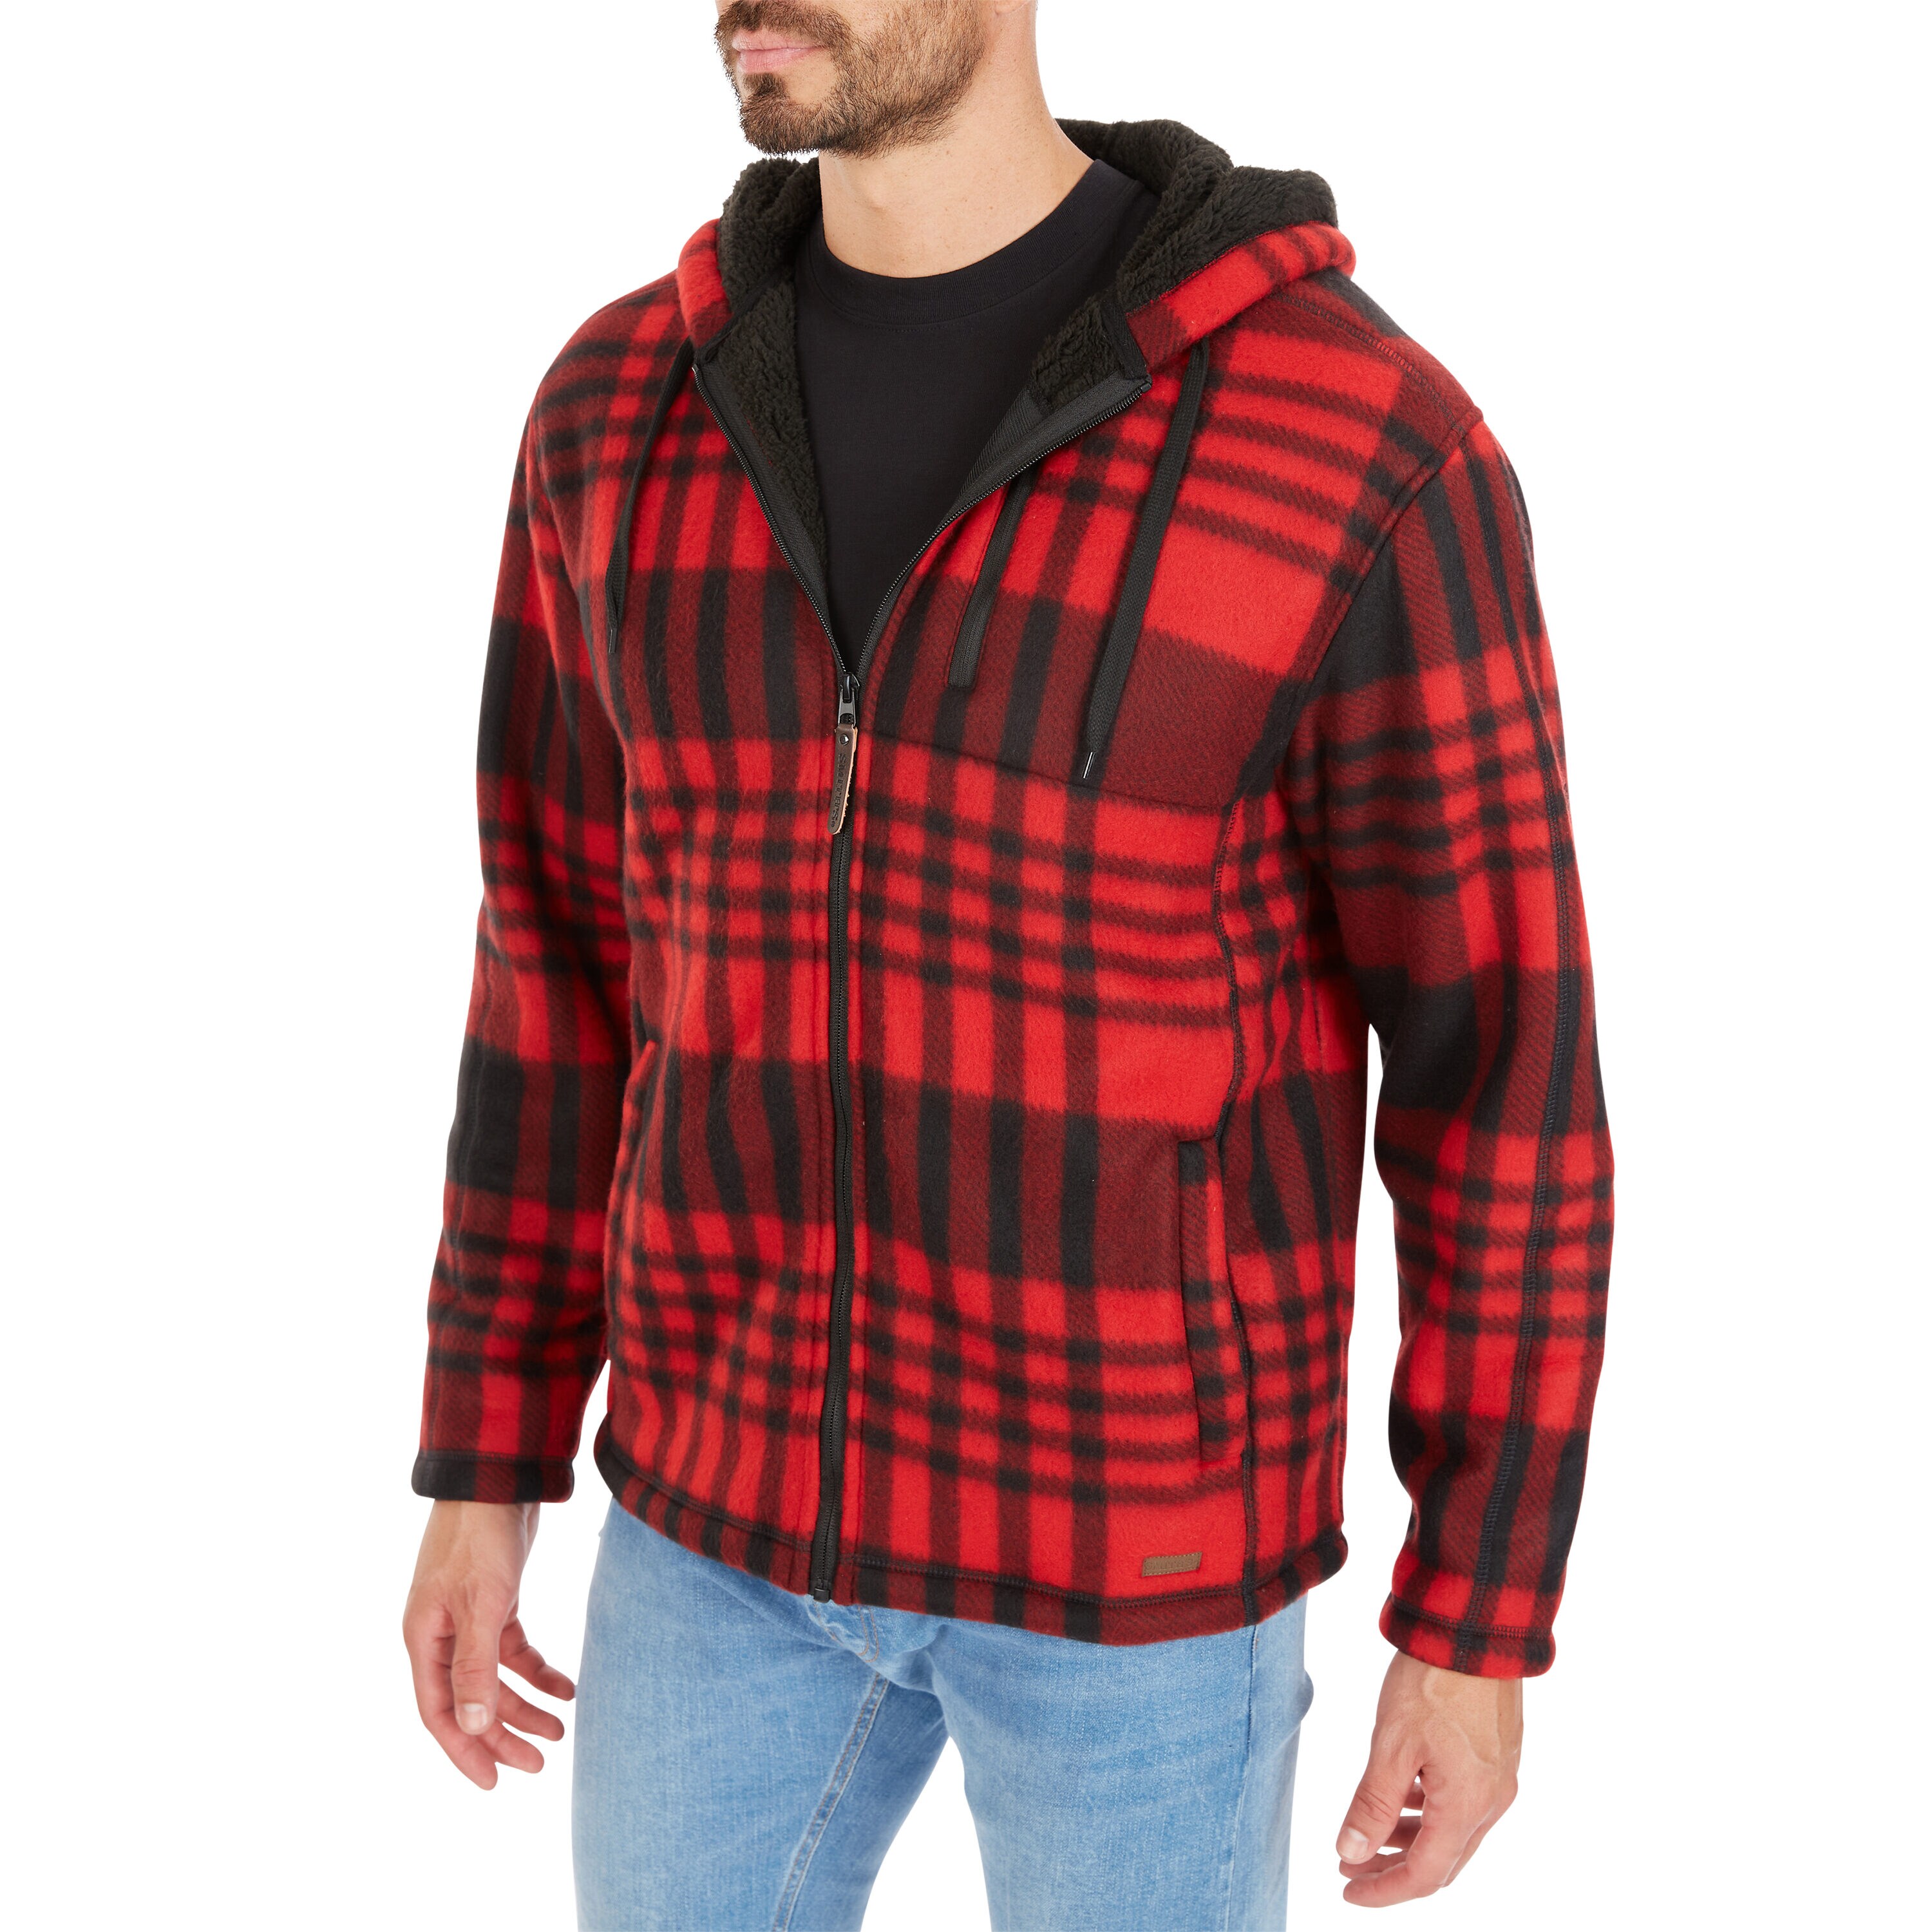 Smith\'s Workwear Butter-Sherpa Jacket department Work Full Jackets Polar the Fleece & Hooded Coats Plaid Lined in Zip at